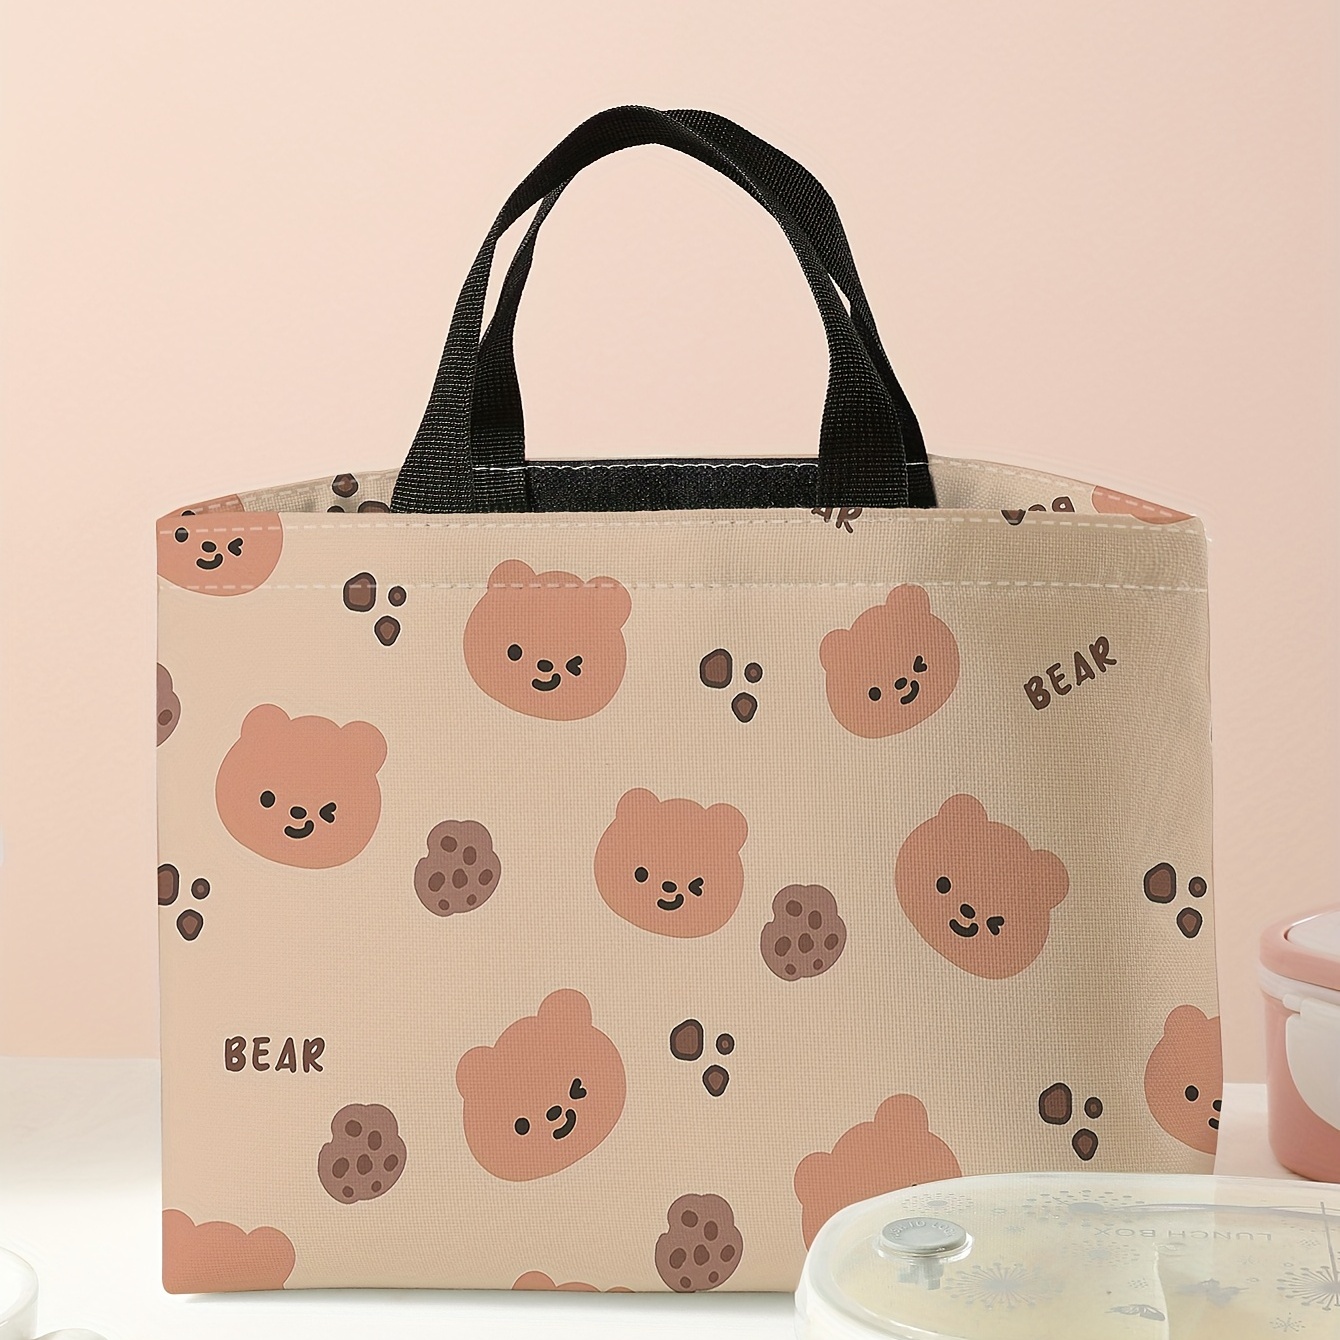 1pc Cartoon Lunch Box Bag, Cute Deer Thermal Insulated Bag, Food Container  For School Or Work, Travel Organizer With Ice Pack